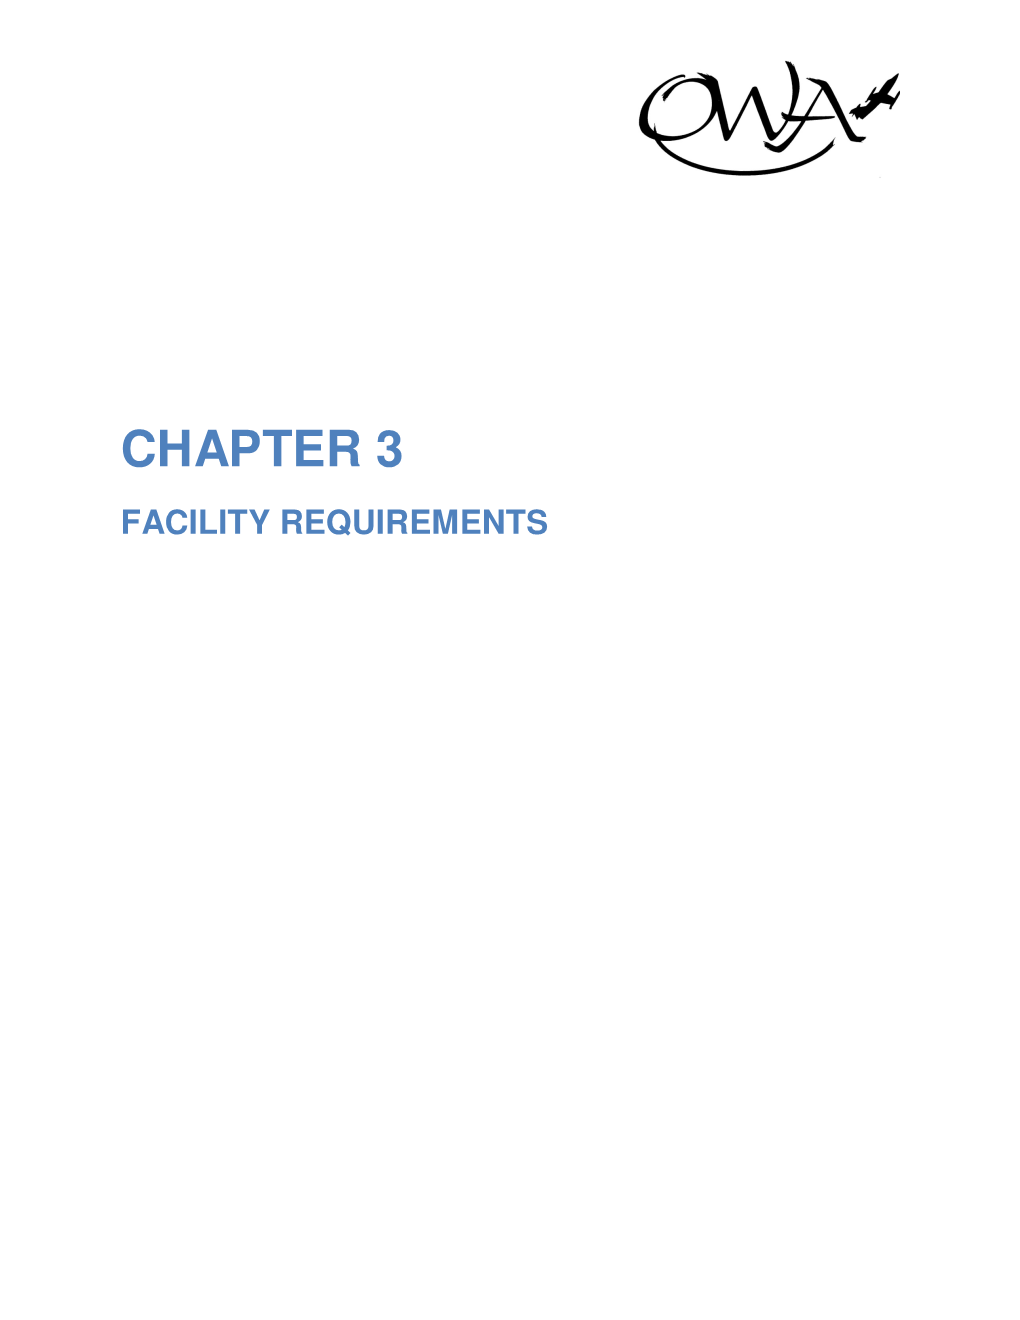 Chapter 3 – Facility Requirements